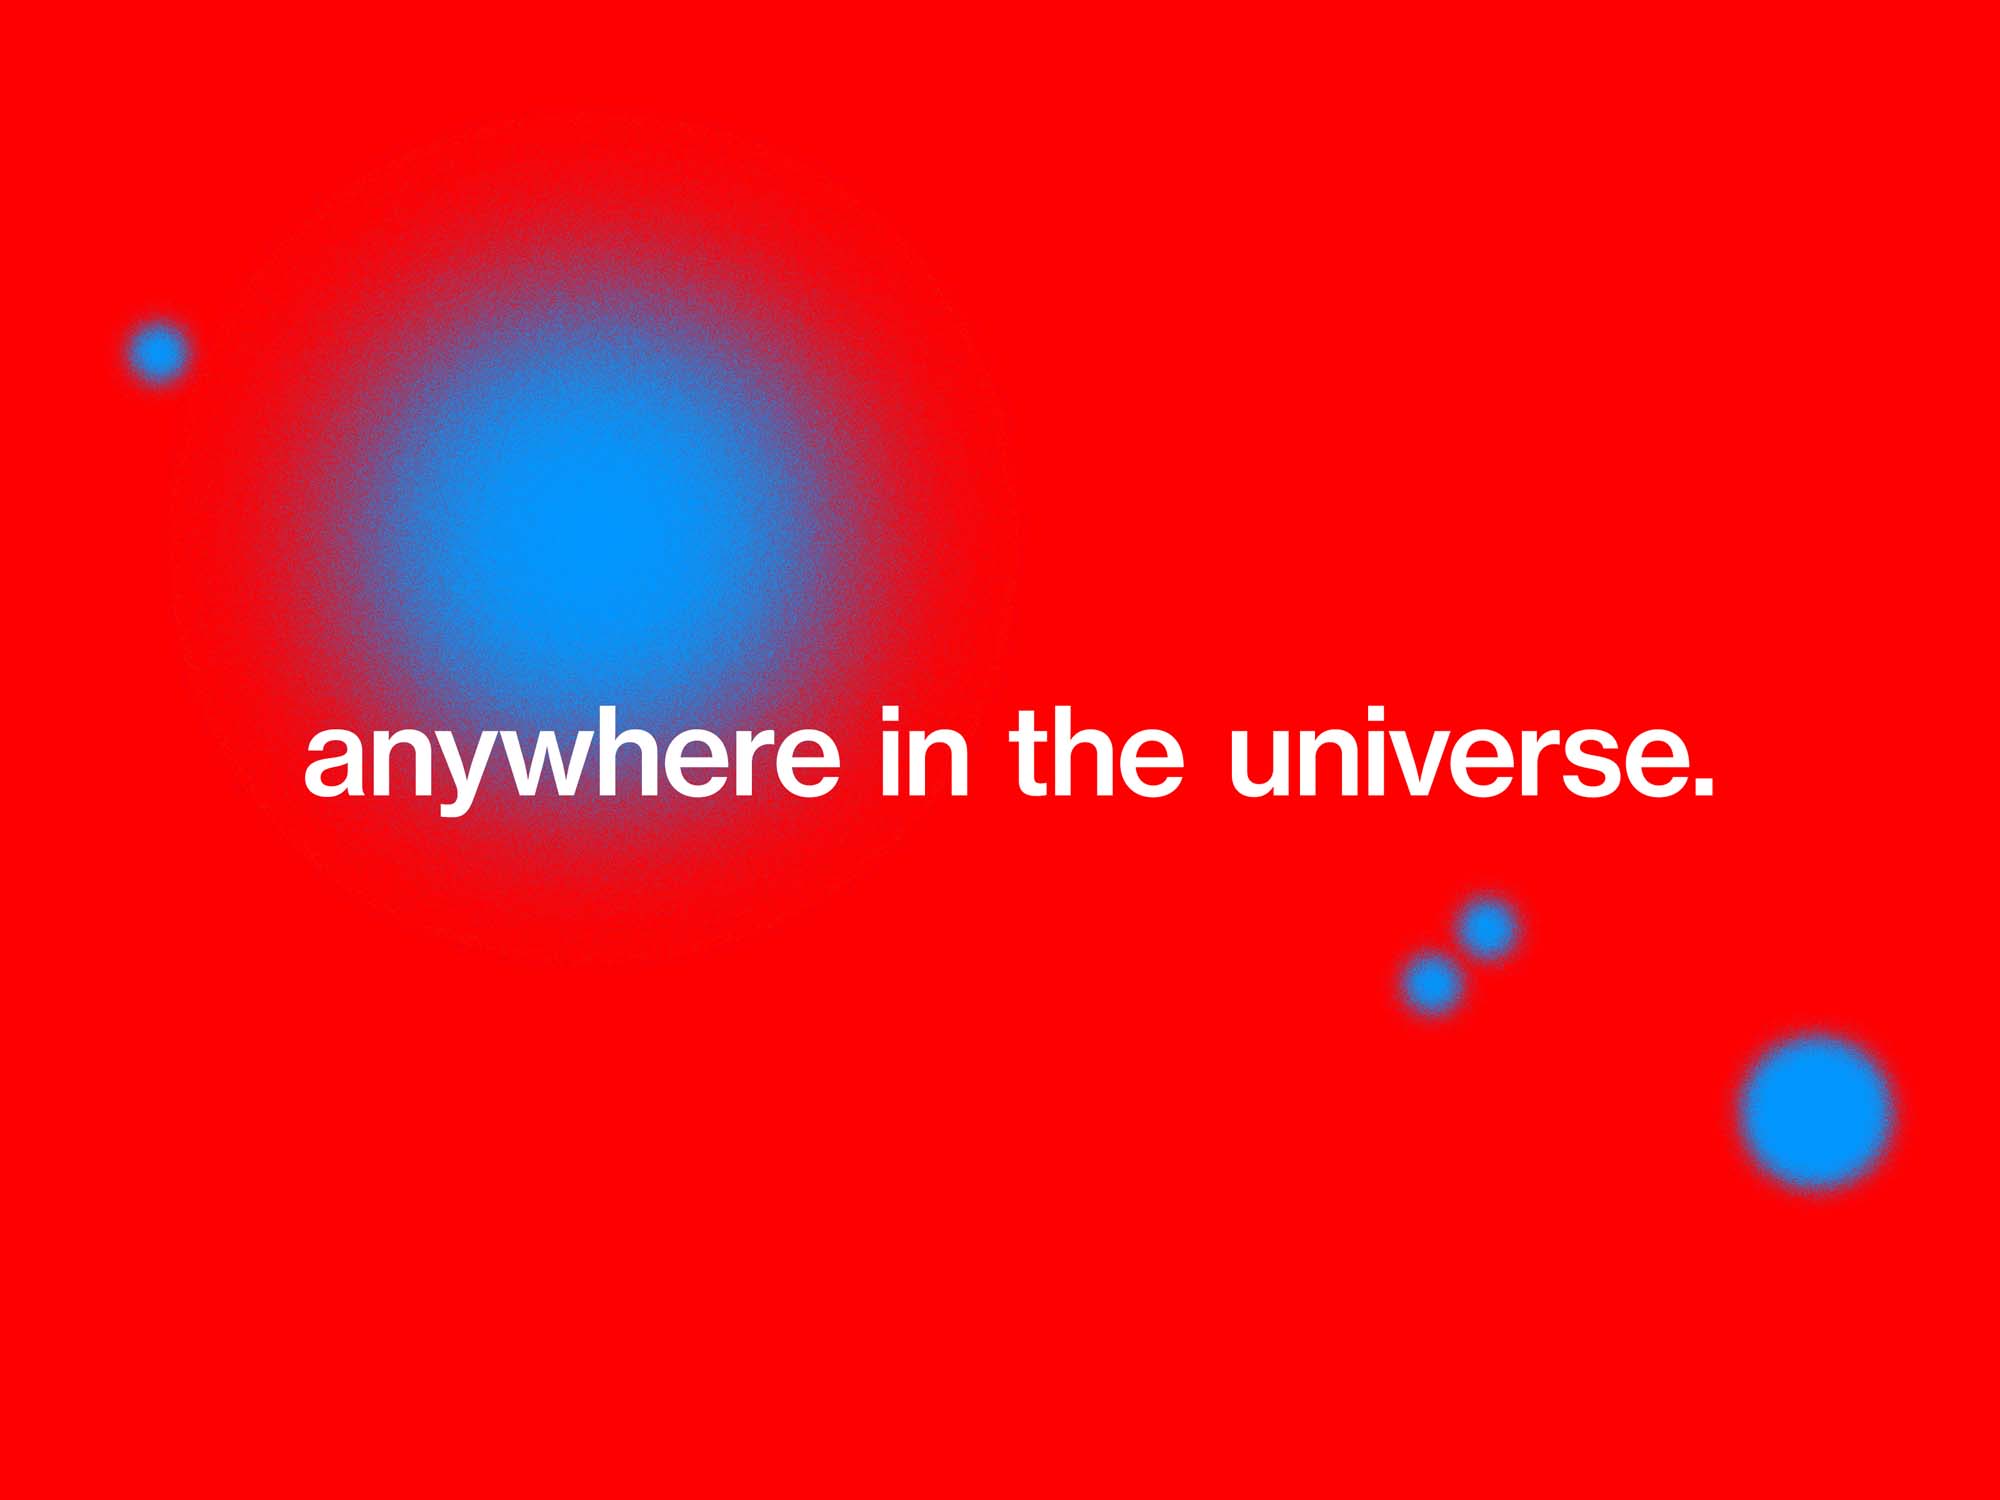 A red image with a large blue circle in the top left corner. White text is overlaid reading 'anywhere in the universe'